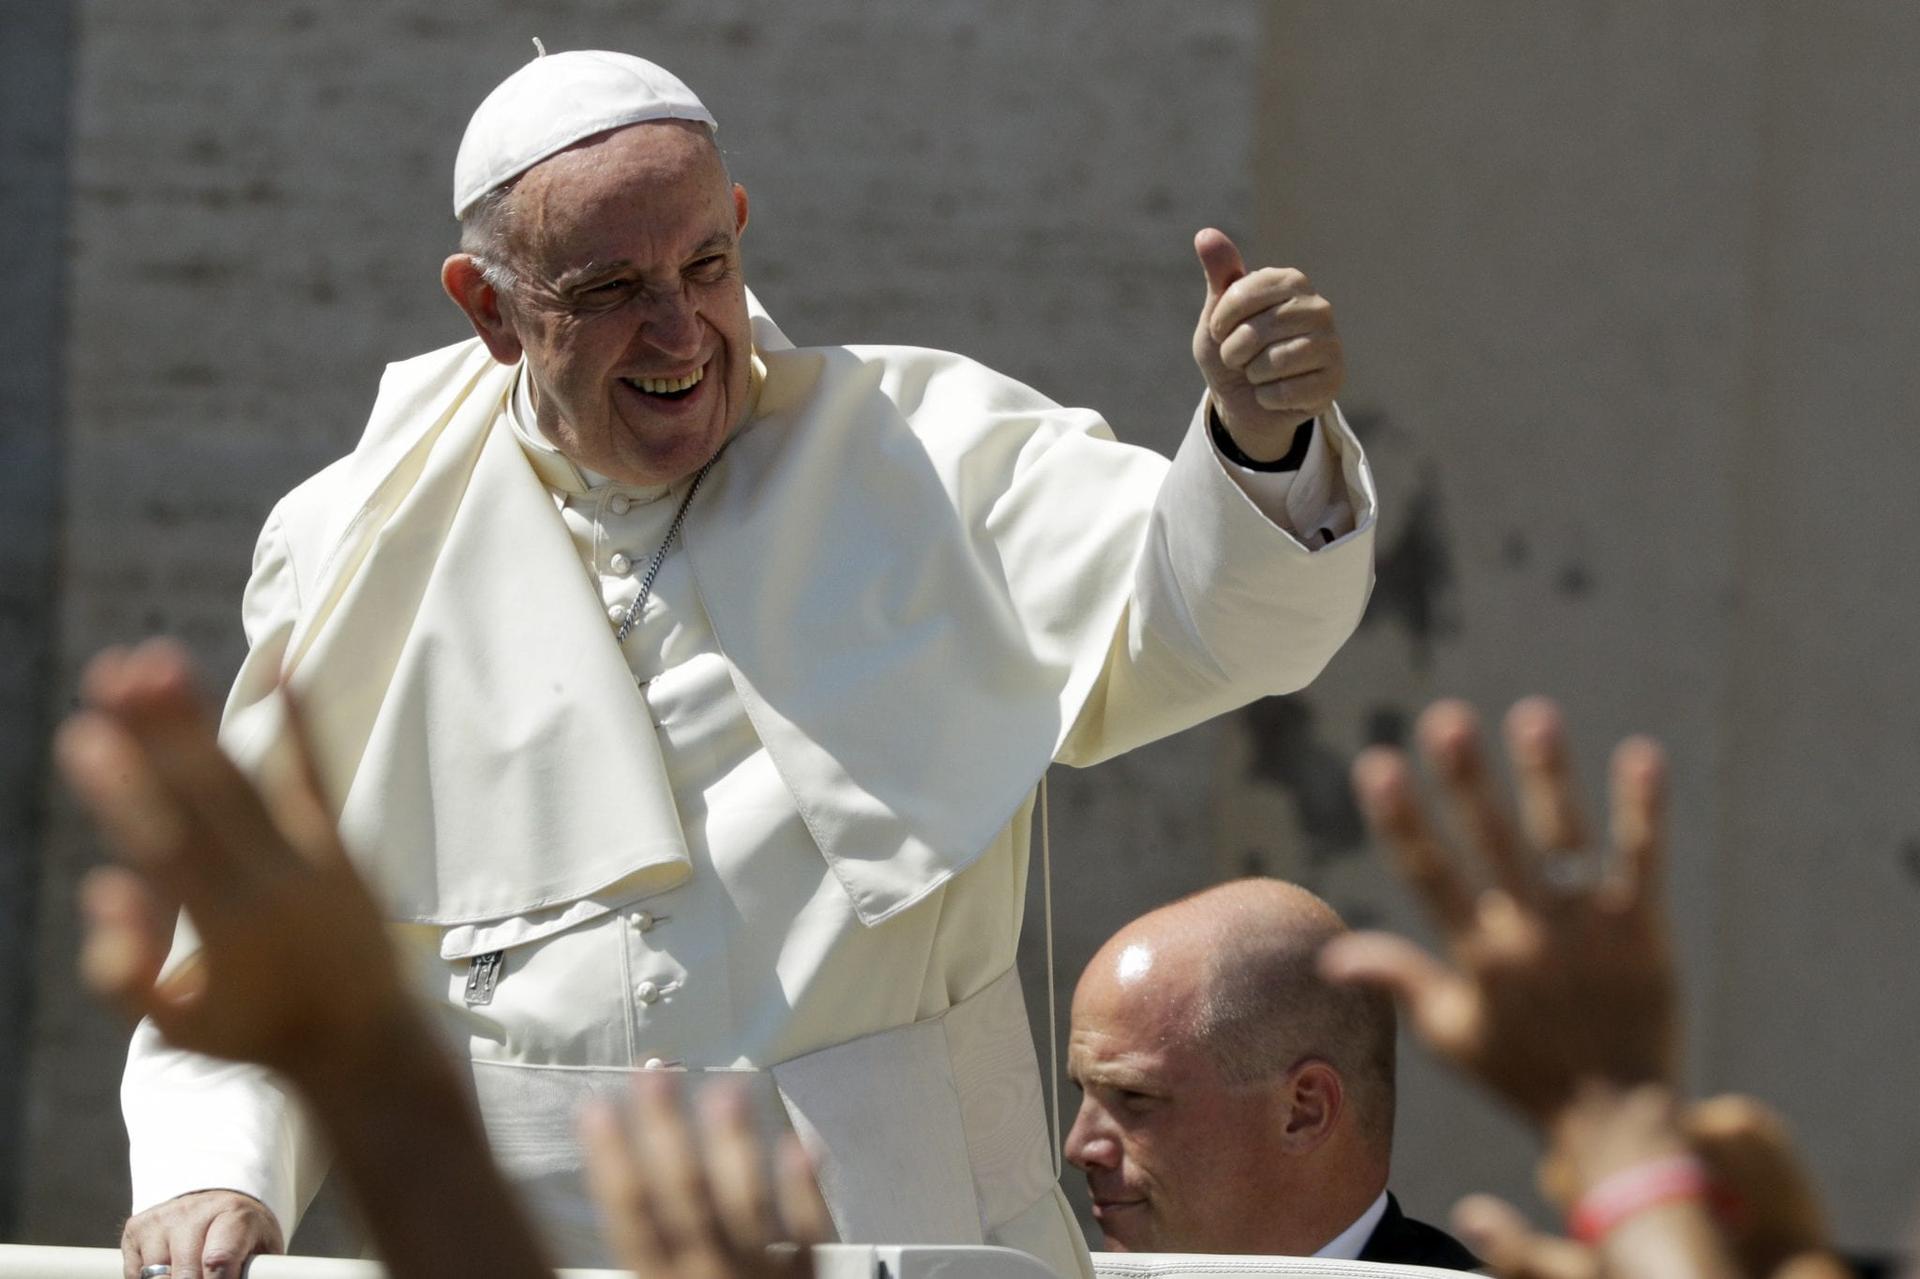 FAQs on Pope Francis in Ireland, including size, pricetag and blowback